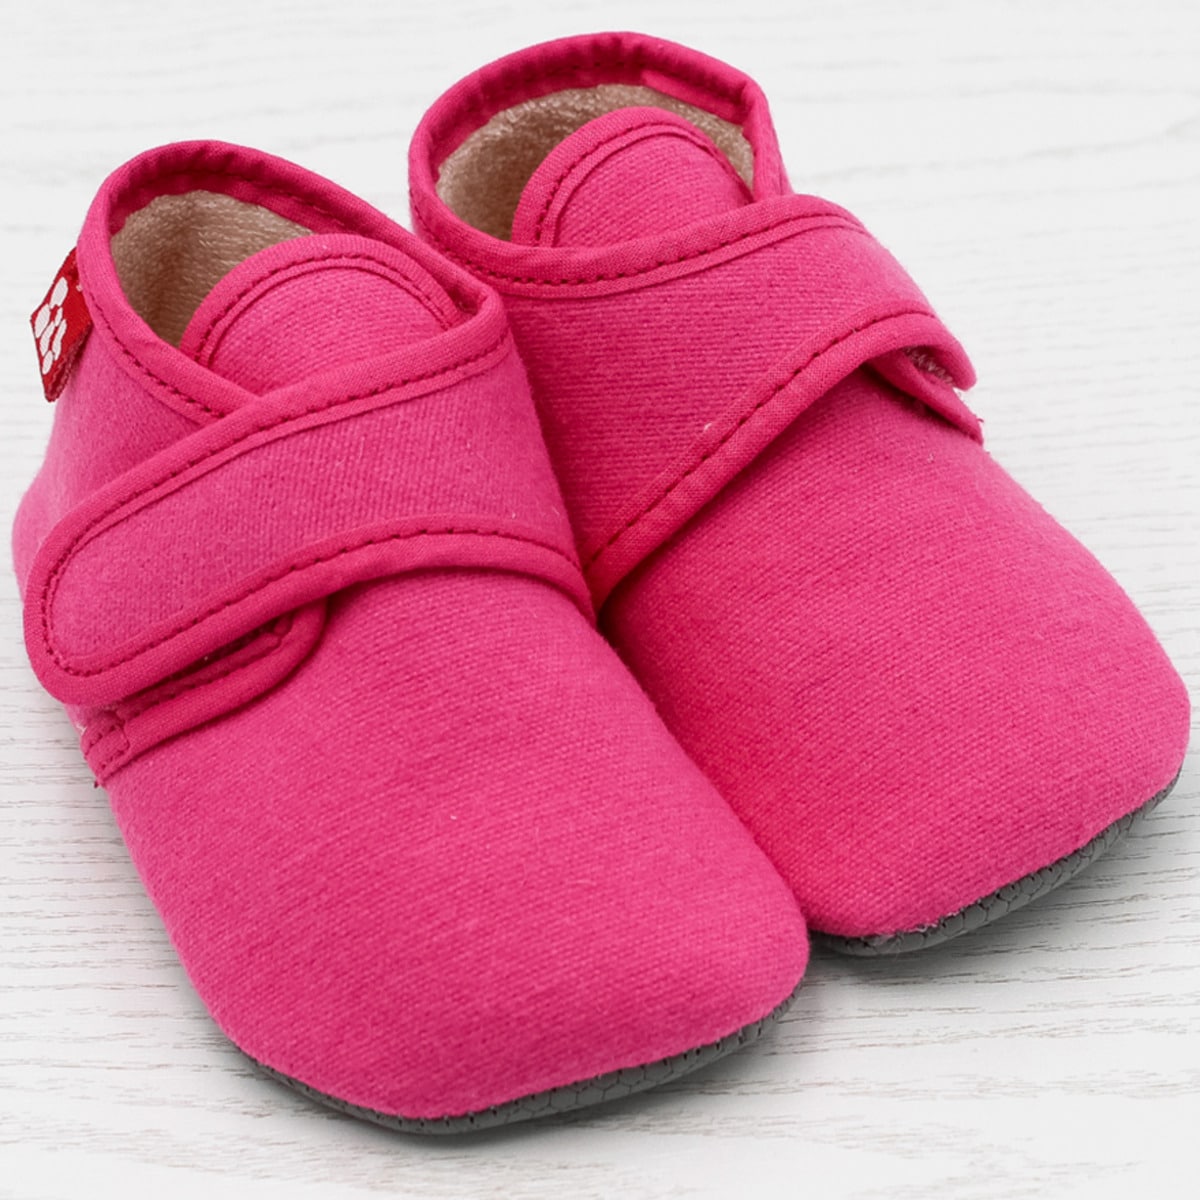 pololo-cotton-slippers-cozy-pink-frontal-1200-1200